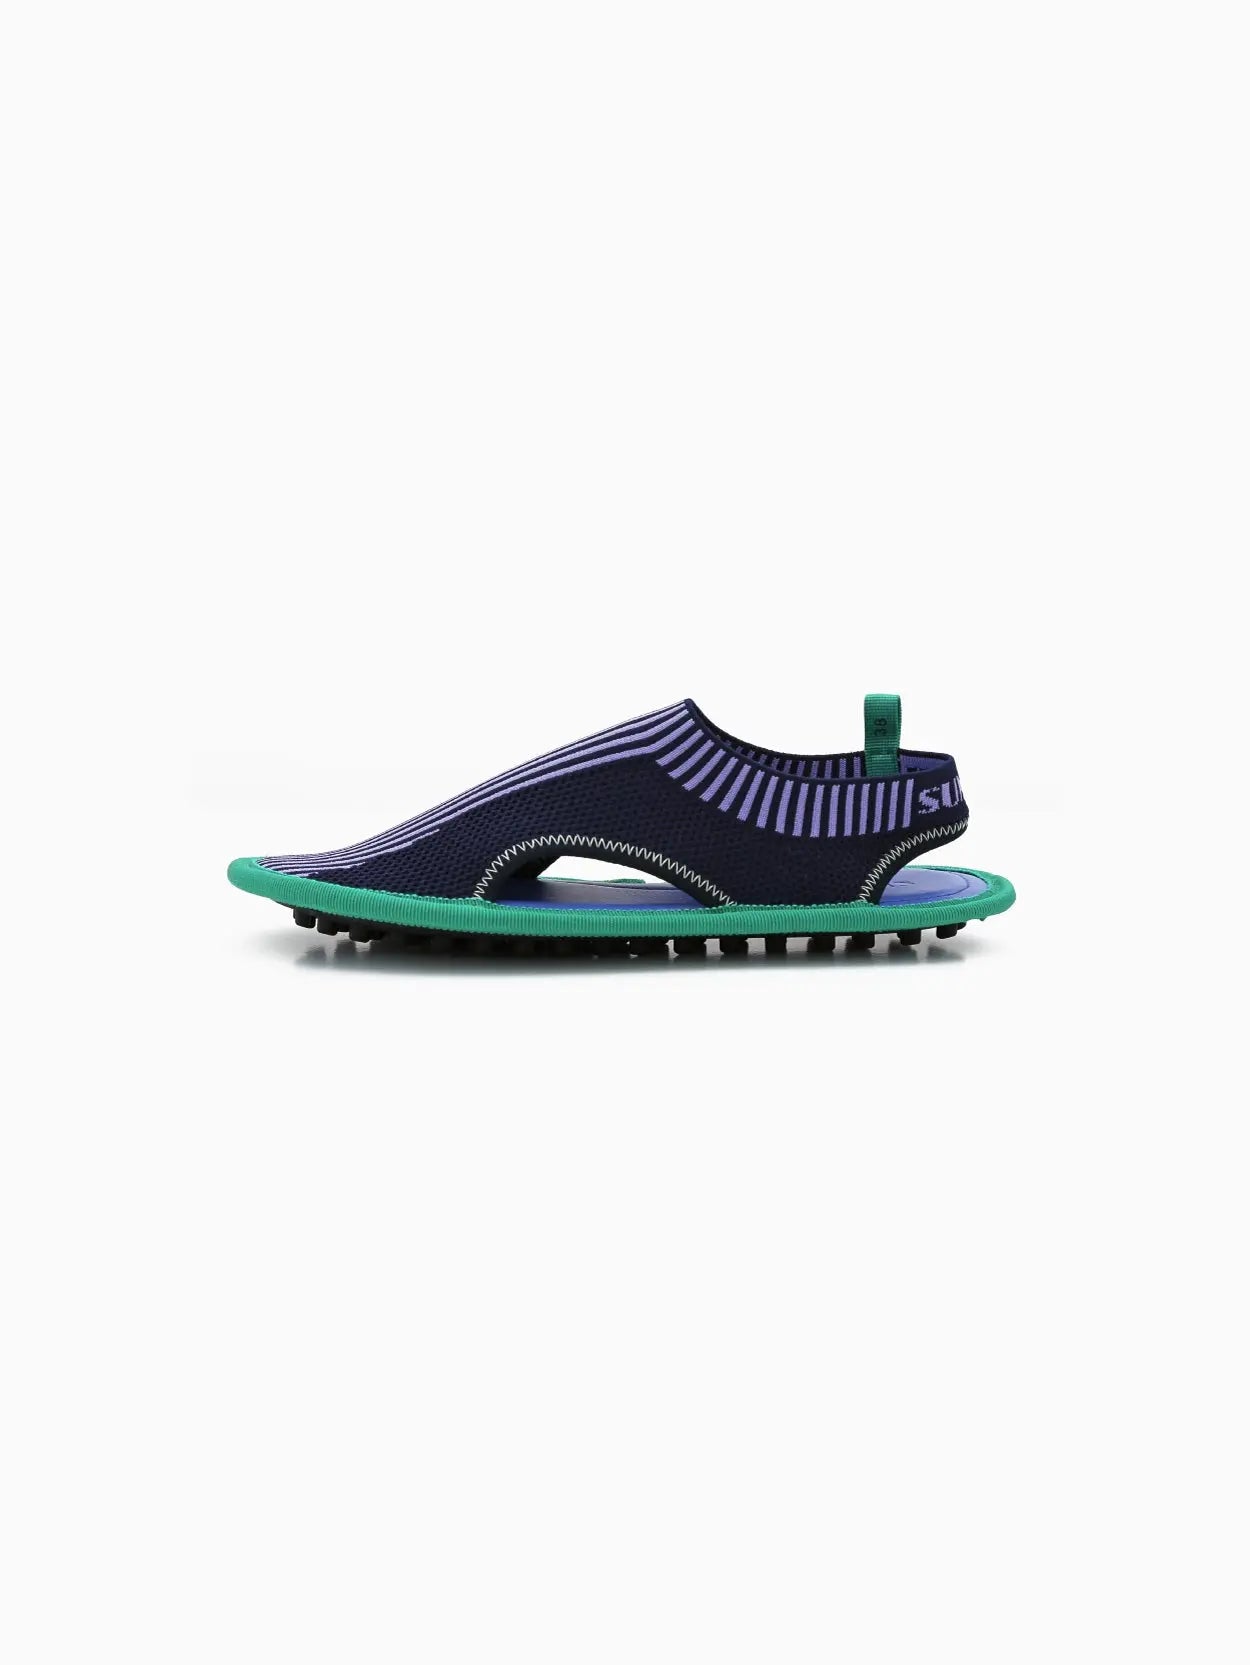 A single blue and green slip-on athletic shoe with a sock-like upper design and a flexible sole featuring prominent tread. The shoe displays cut-out details on the sides and a small loop at the heel for easy wearing, available exclusively at bassalstore in Barcelona. This is the Chiodi Knit Flat by Sunnei.